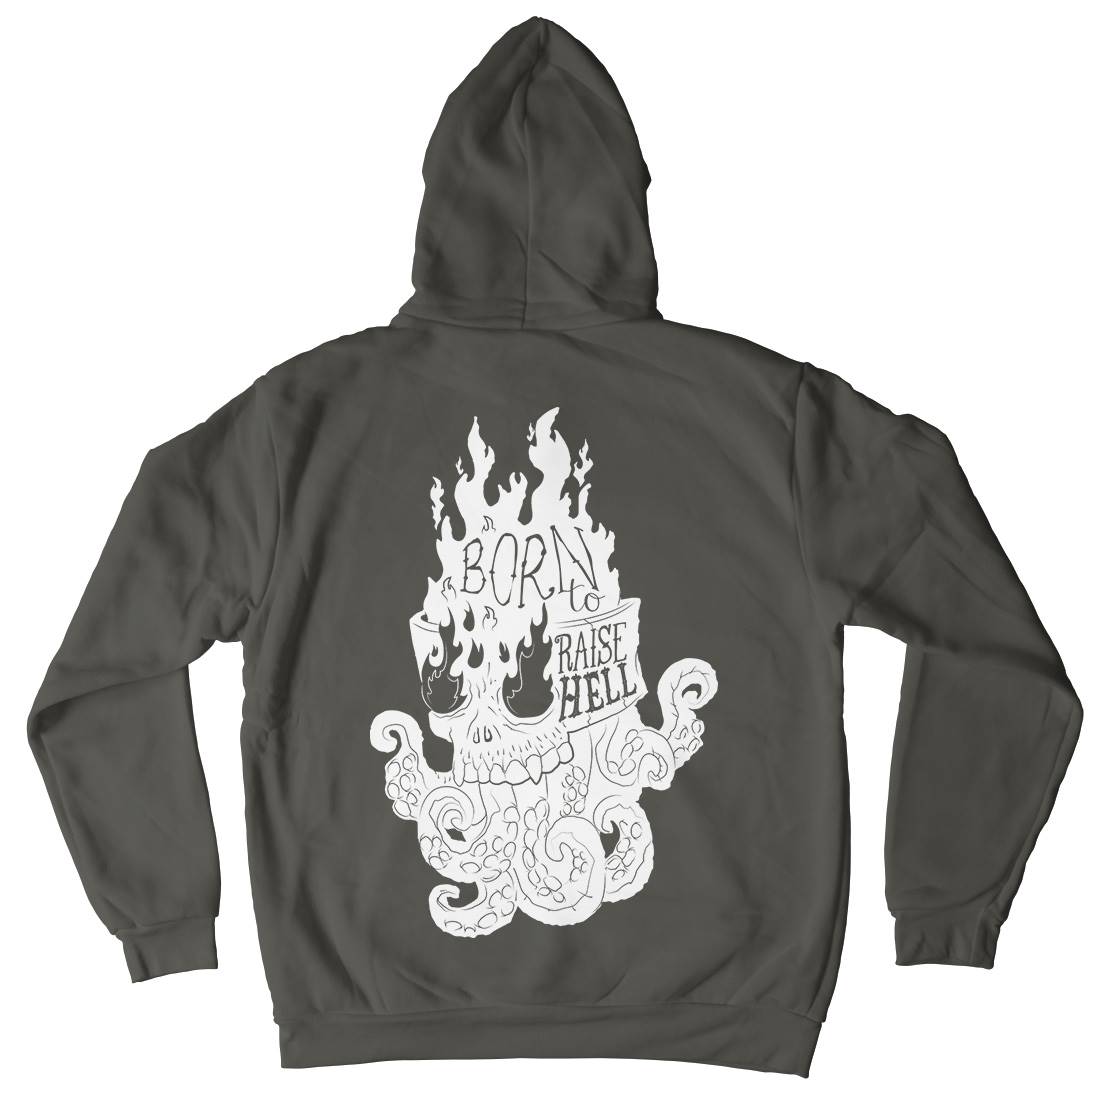 Raise Hell Kids Crew Neck Hoodie Motorcycles A960